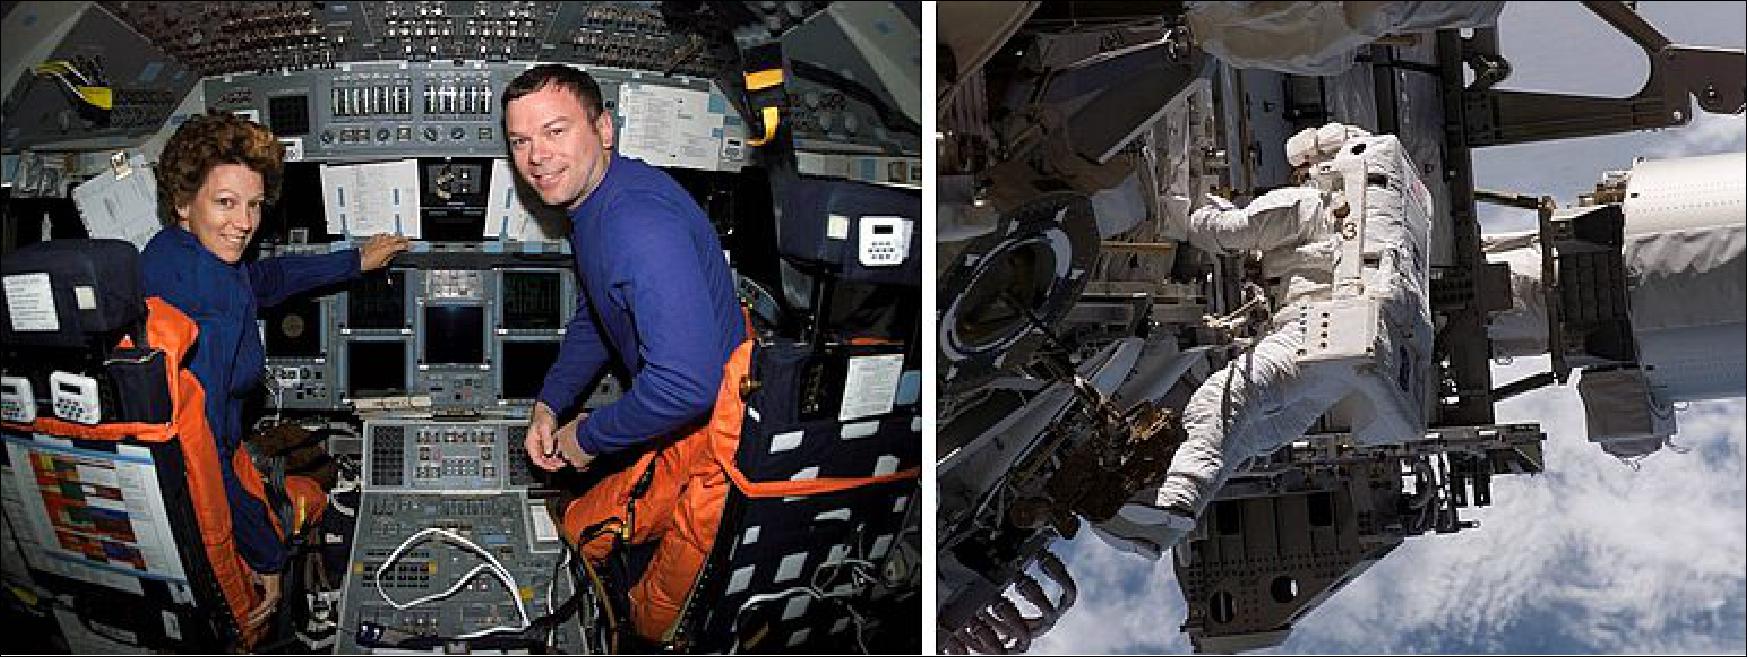 Figure 99: Left: STS-114 Commander Collins (at left) with Pilot James M. "Vegas" Kelly on the flight deck of Discovery. Right: Piper working on the P3/P4 truss segment during an EVA on STS-115 (image credit: NASA/JSC)